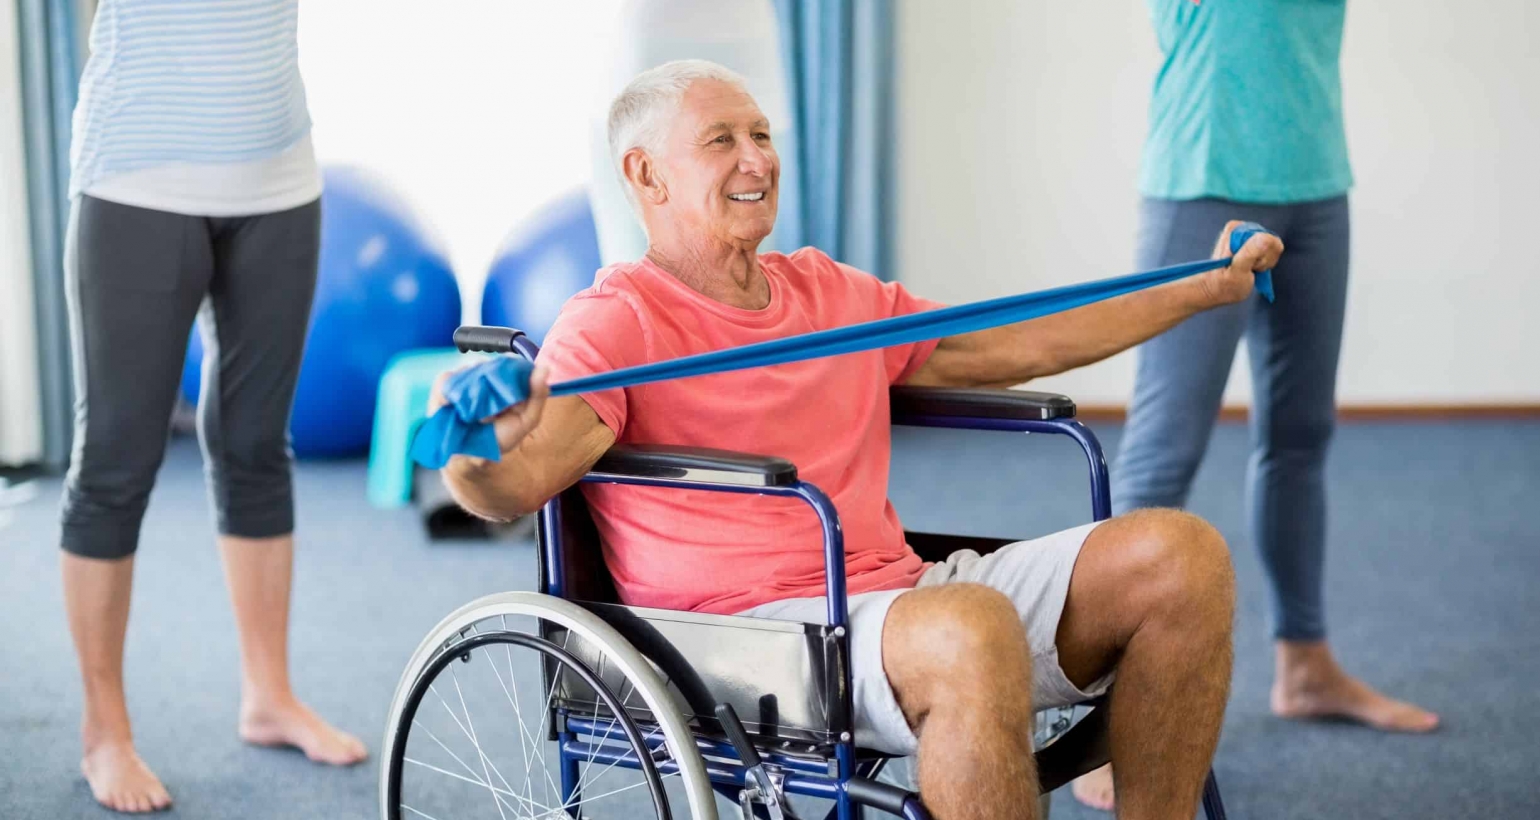 Discover the top 7 wheelchair exercises for seniors to boost strength, flexibility, and overall well-being.